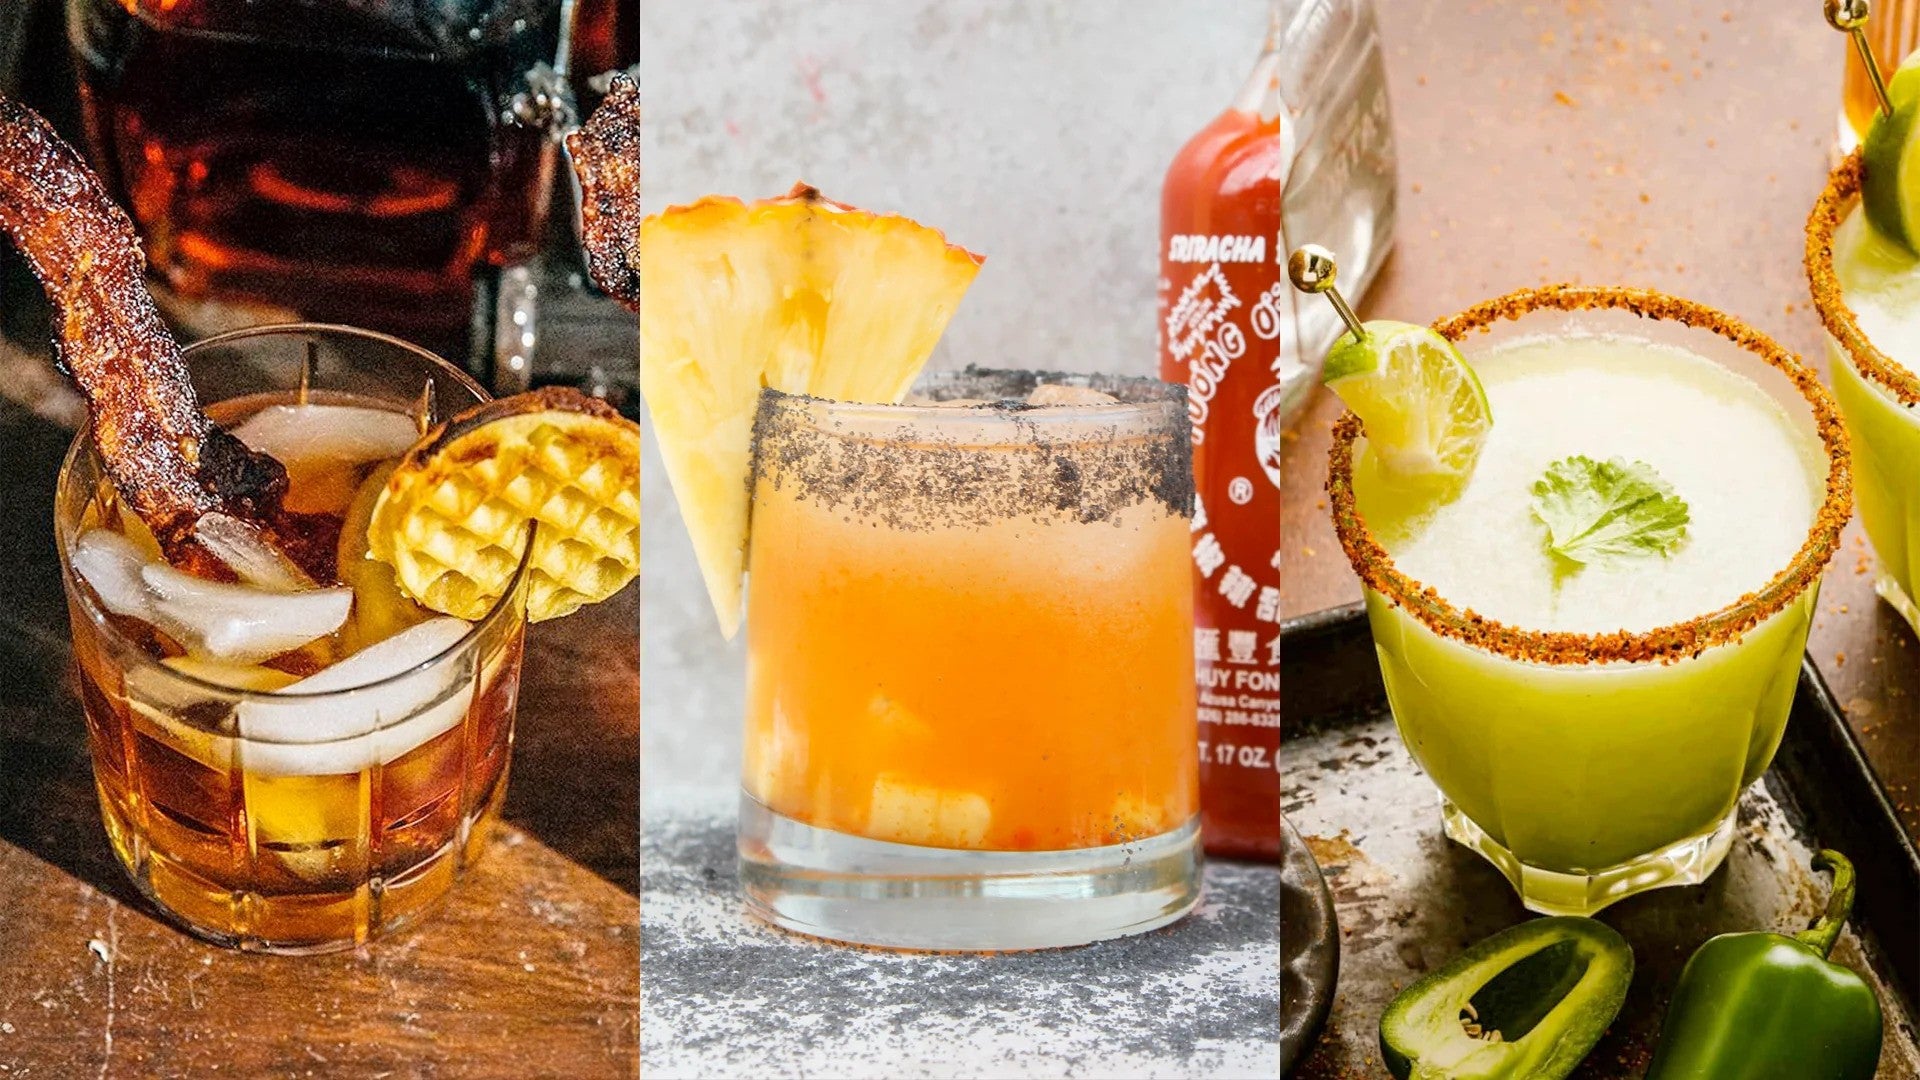 Unusual Cocktail Concoctions: Mixing the Unexpected